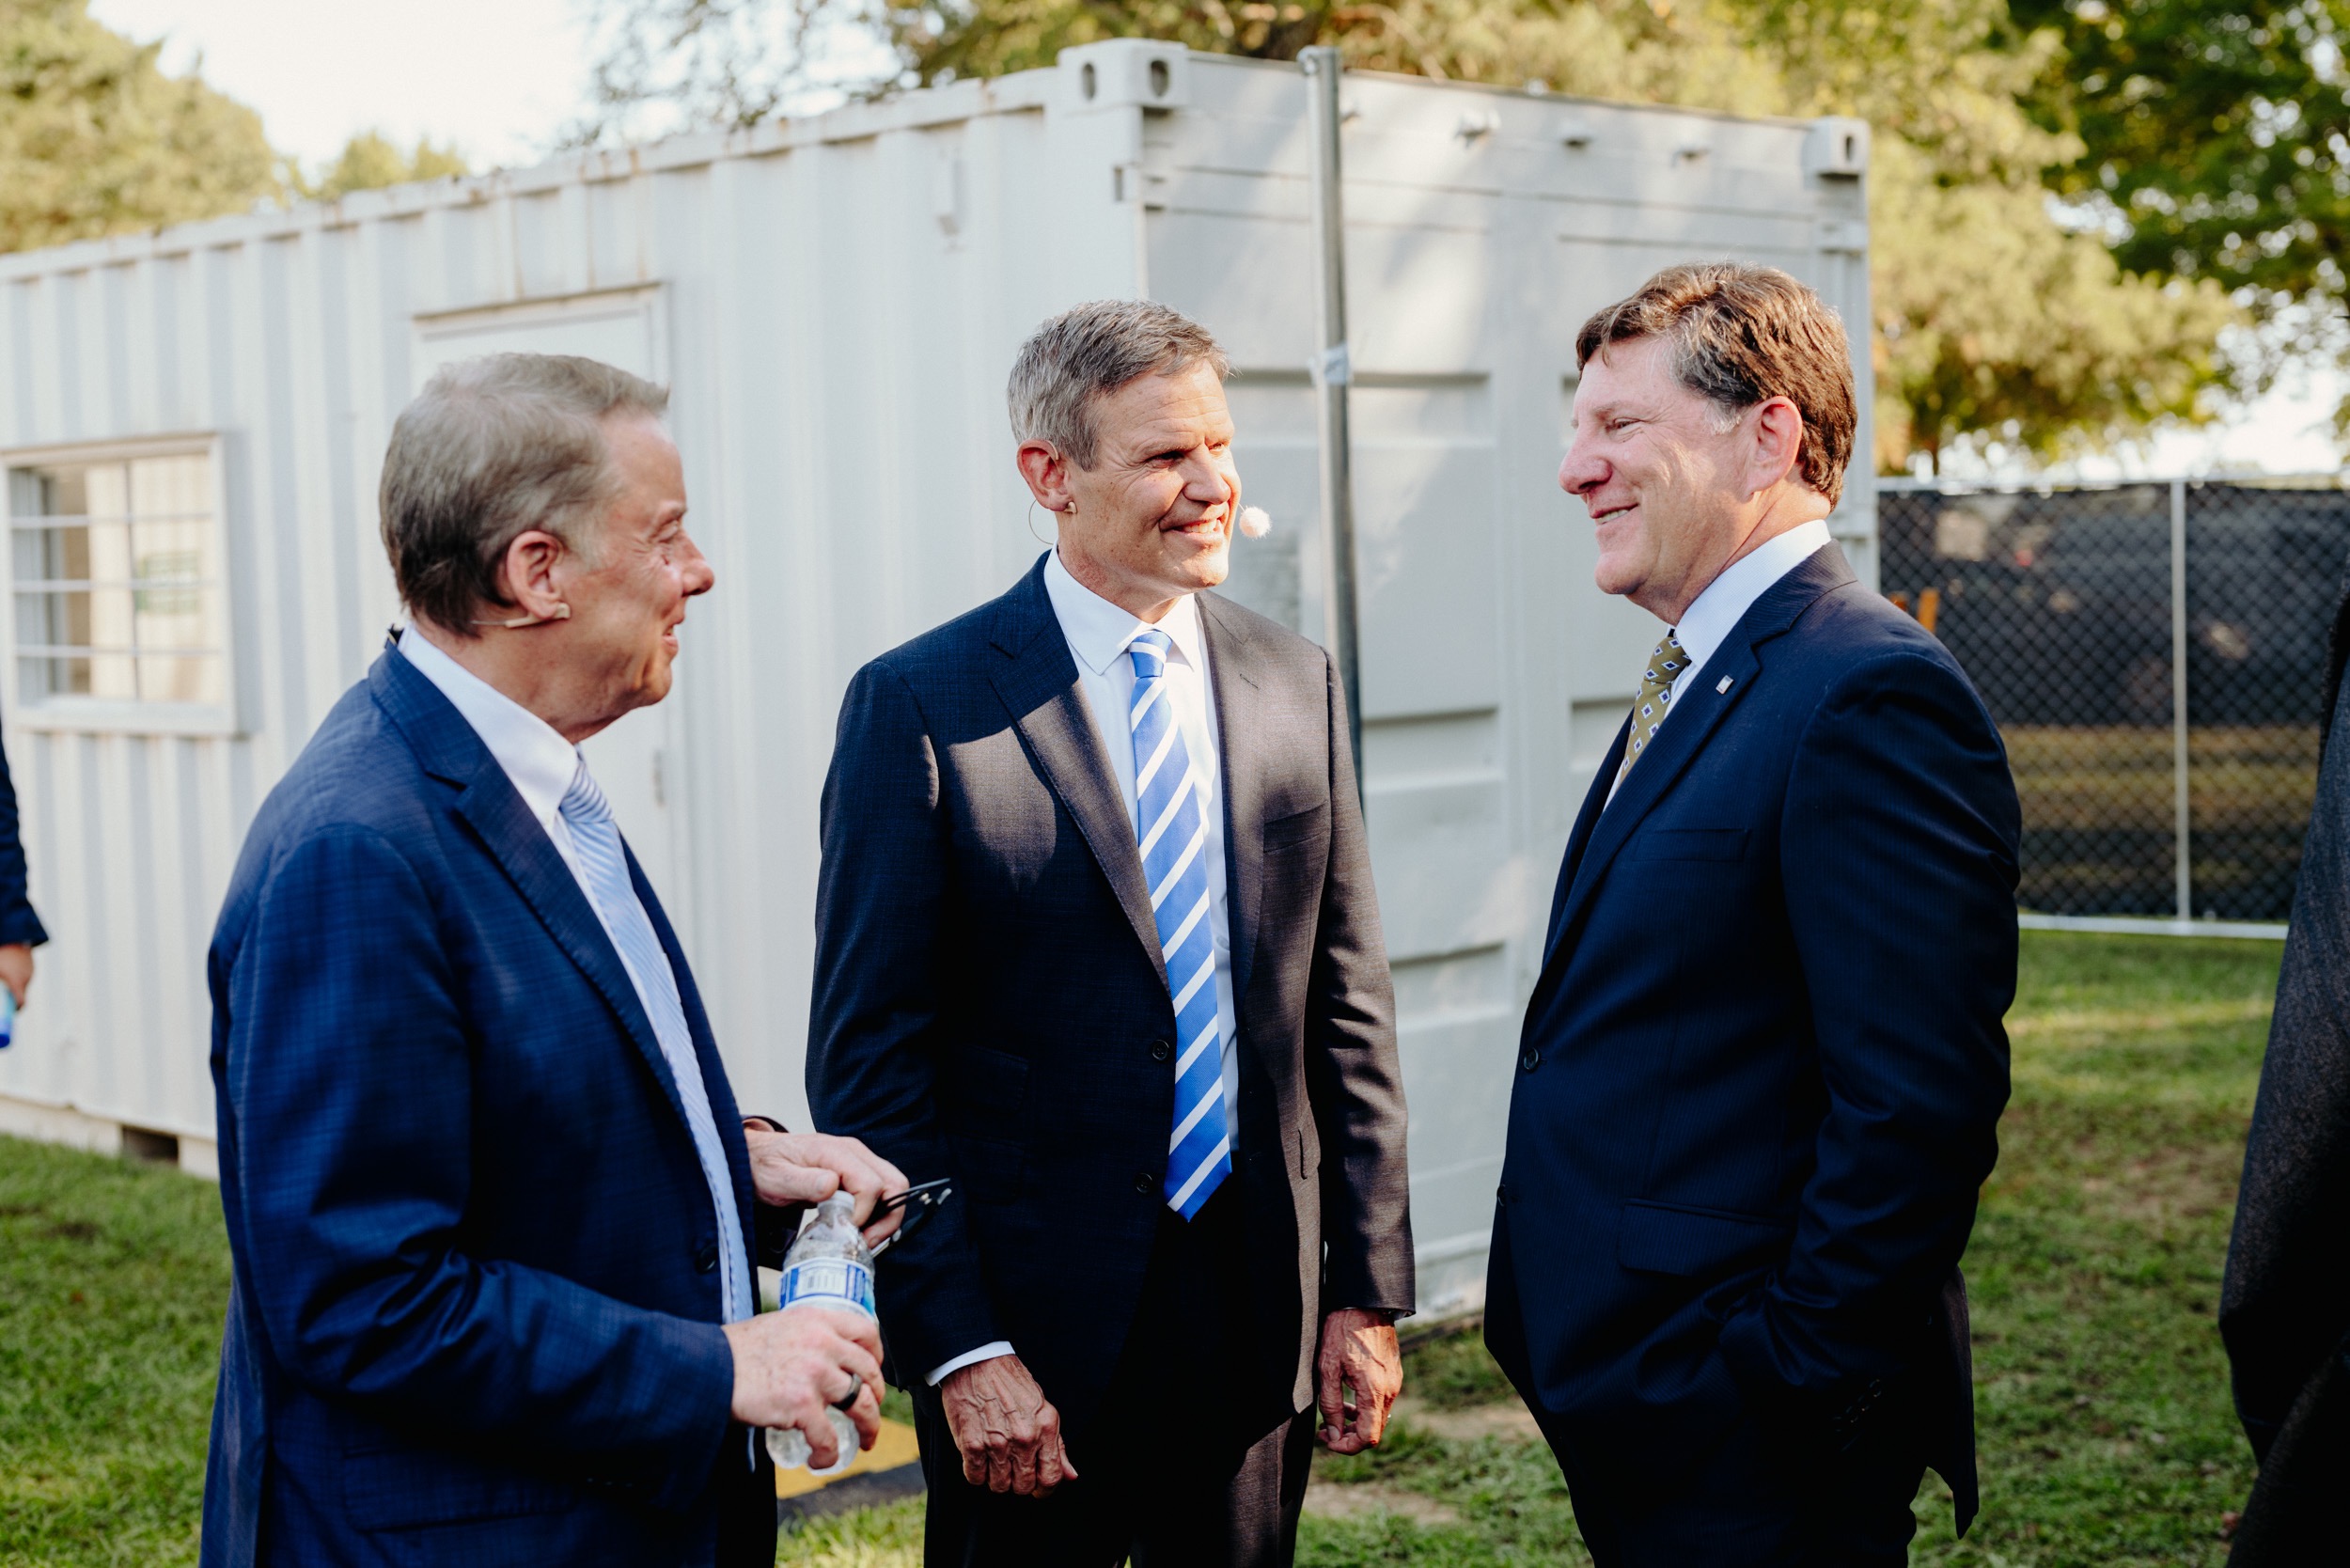 Left to Right: Ford Motor Company Executive Chair Bill Ford, Tennessee Governor Bill Lee and TVA President and CEO Jeff Lyash announce the largest capital investment project in the history of Tennessee.